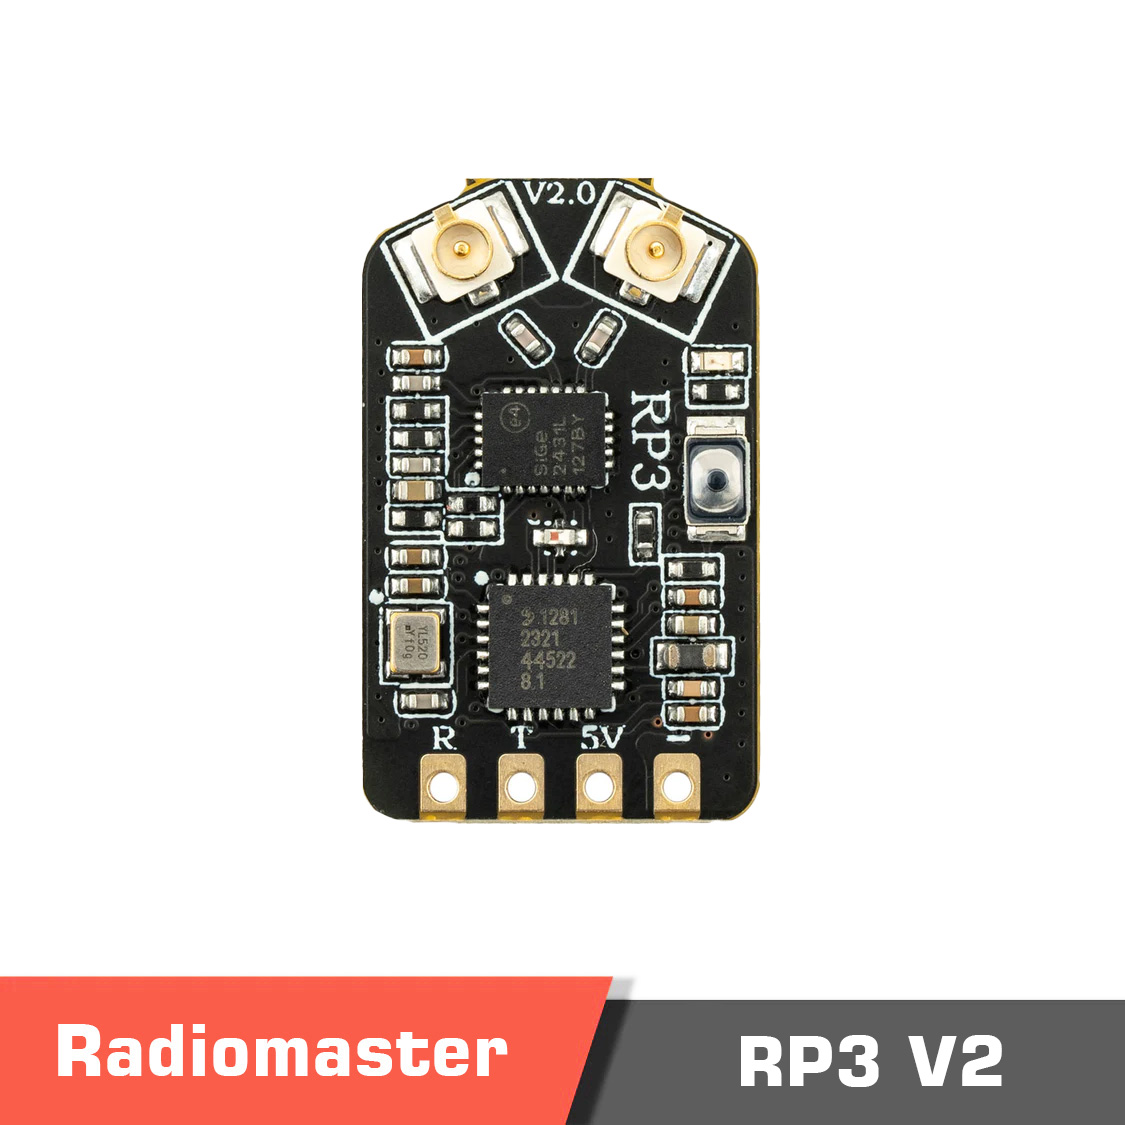 Radiomaster RP3 V2.temp1 - RadioMaster RP4TD,2.4GHz RC Control Receiver,ExpressLRS,ELRS,2.4GHz Radio Receiver,Nano receiver,ExpressLRS 2.4GHz receiver,Improved PCB design,Compact receiver,On-board SMT antenna,CRSF bus interface,RC control system upgrade,2.4GHz ISM Band RC Receiver,Heat dissipation capabilities,High-Performance RC Receiver,Impressive Range and Responsiveness Receiver,High refresh rate receiver,Reliable signal reception - MotioNew - 2